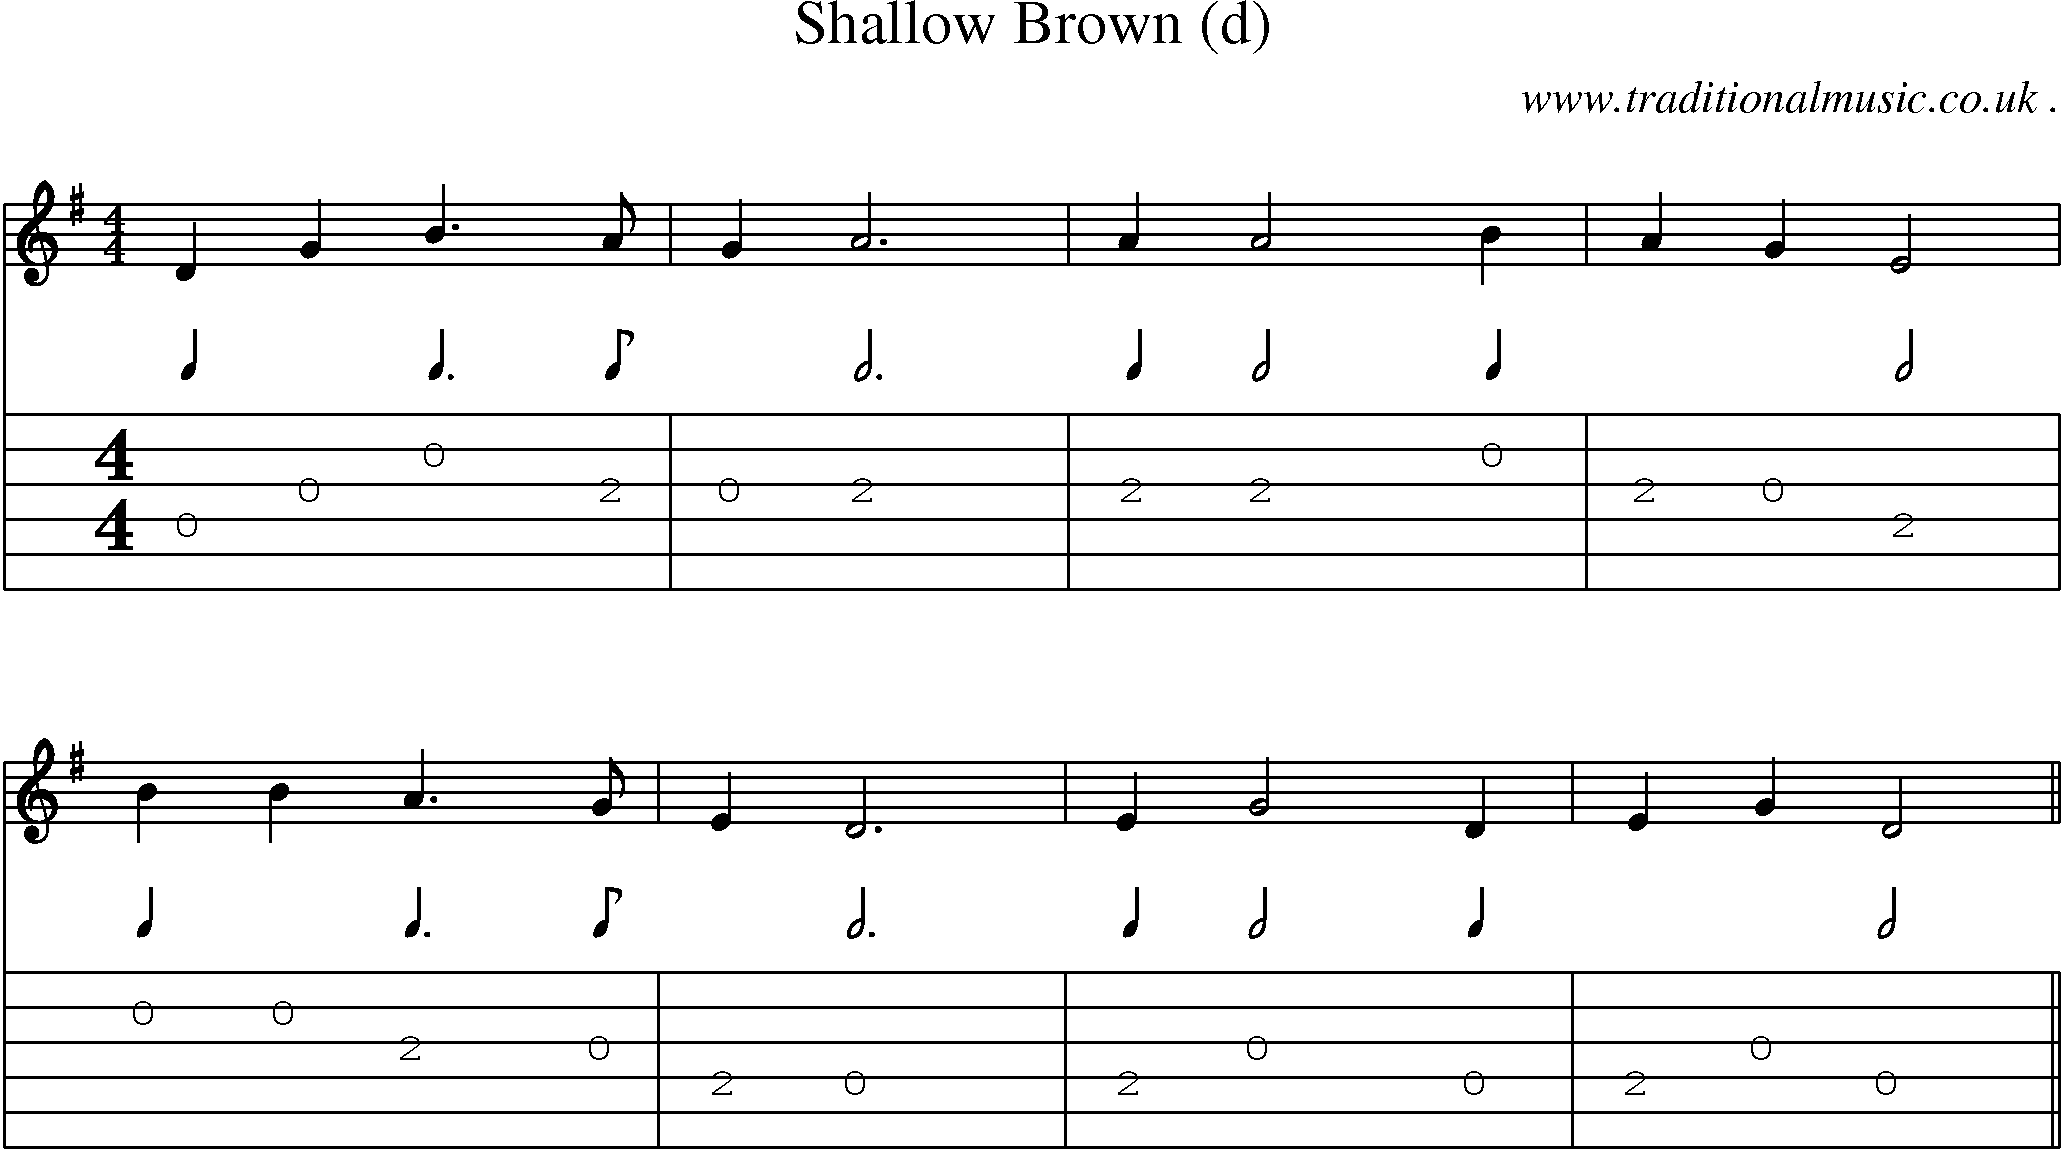 Sheet-Music and Guitar Tabs for Shallow Brown (d)